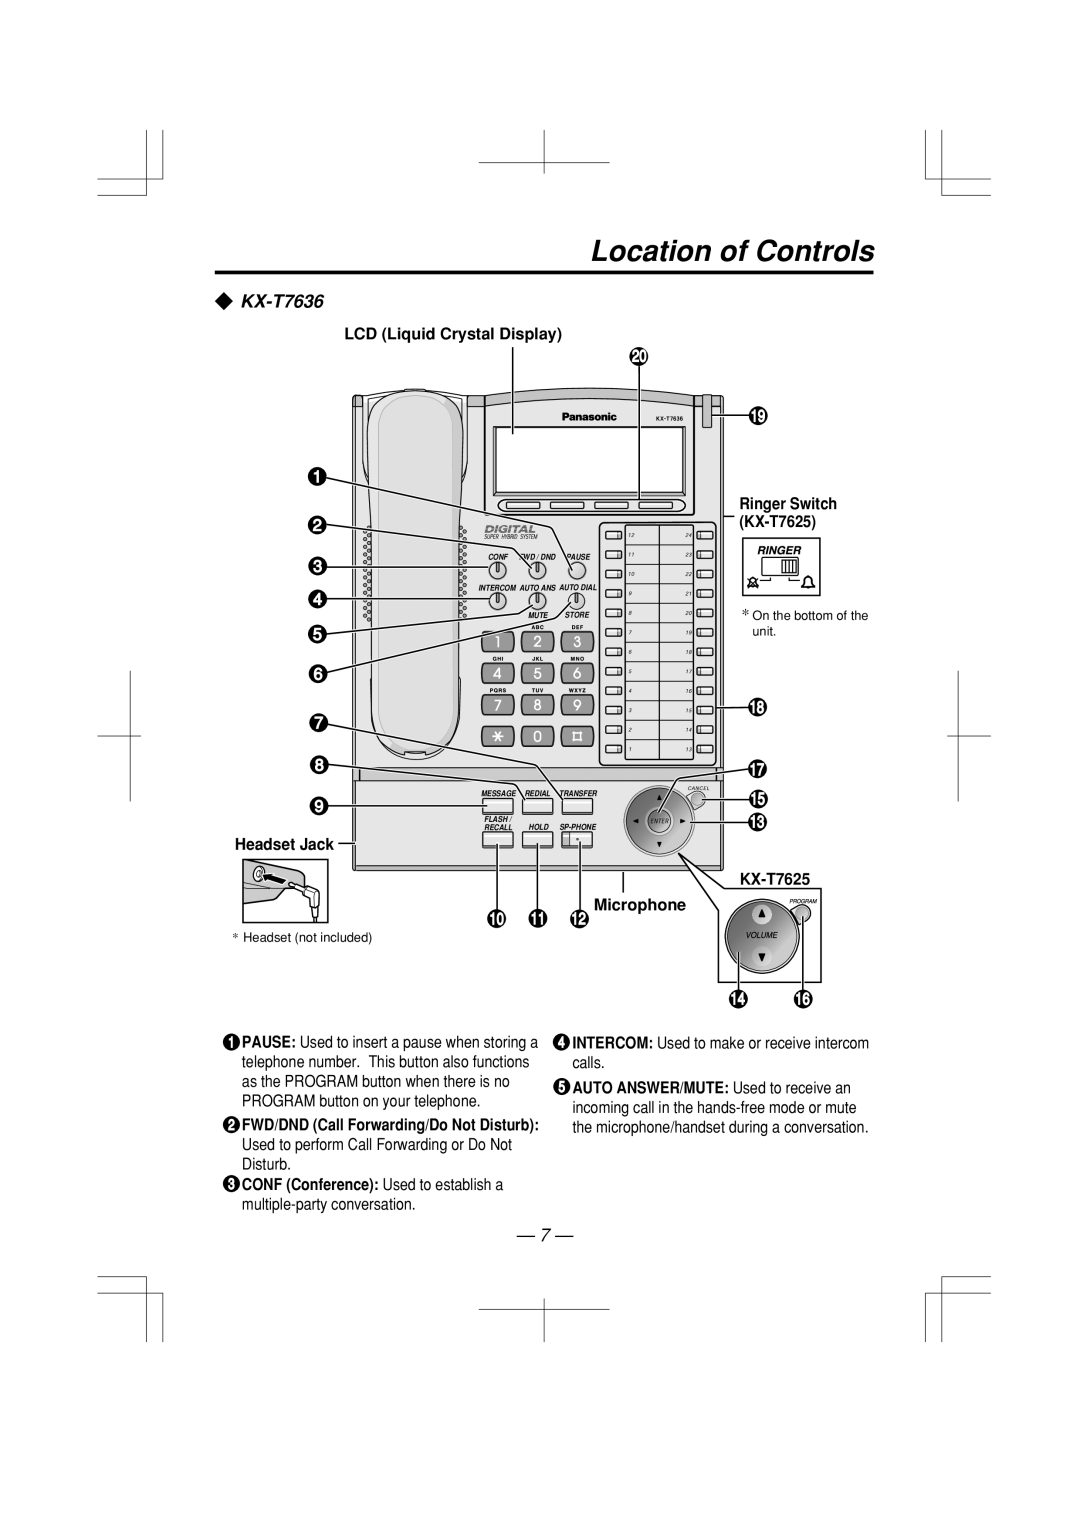 Panasonic KX-T7630E, KX-T7625E, KX-T7633E, KX-T7636E manual Location of Controls, Ringer Switch, 10 11 